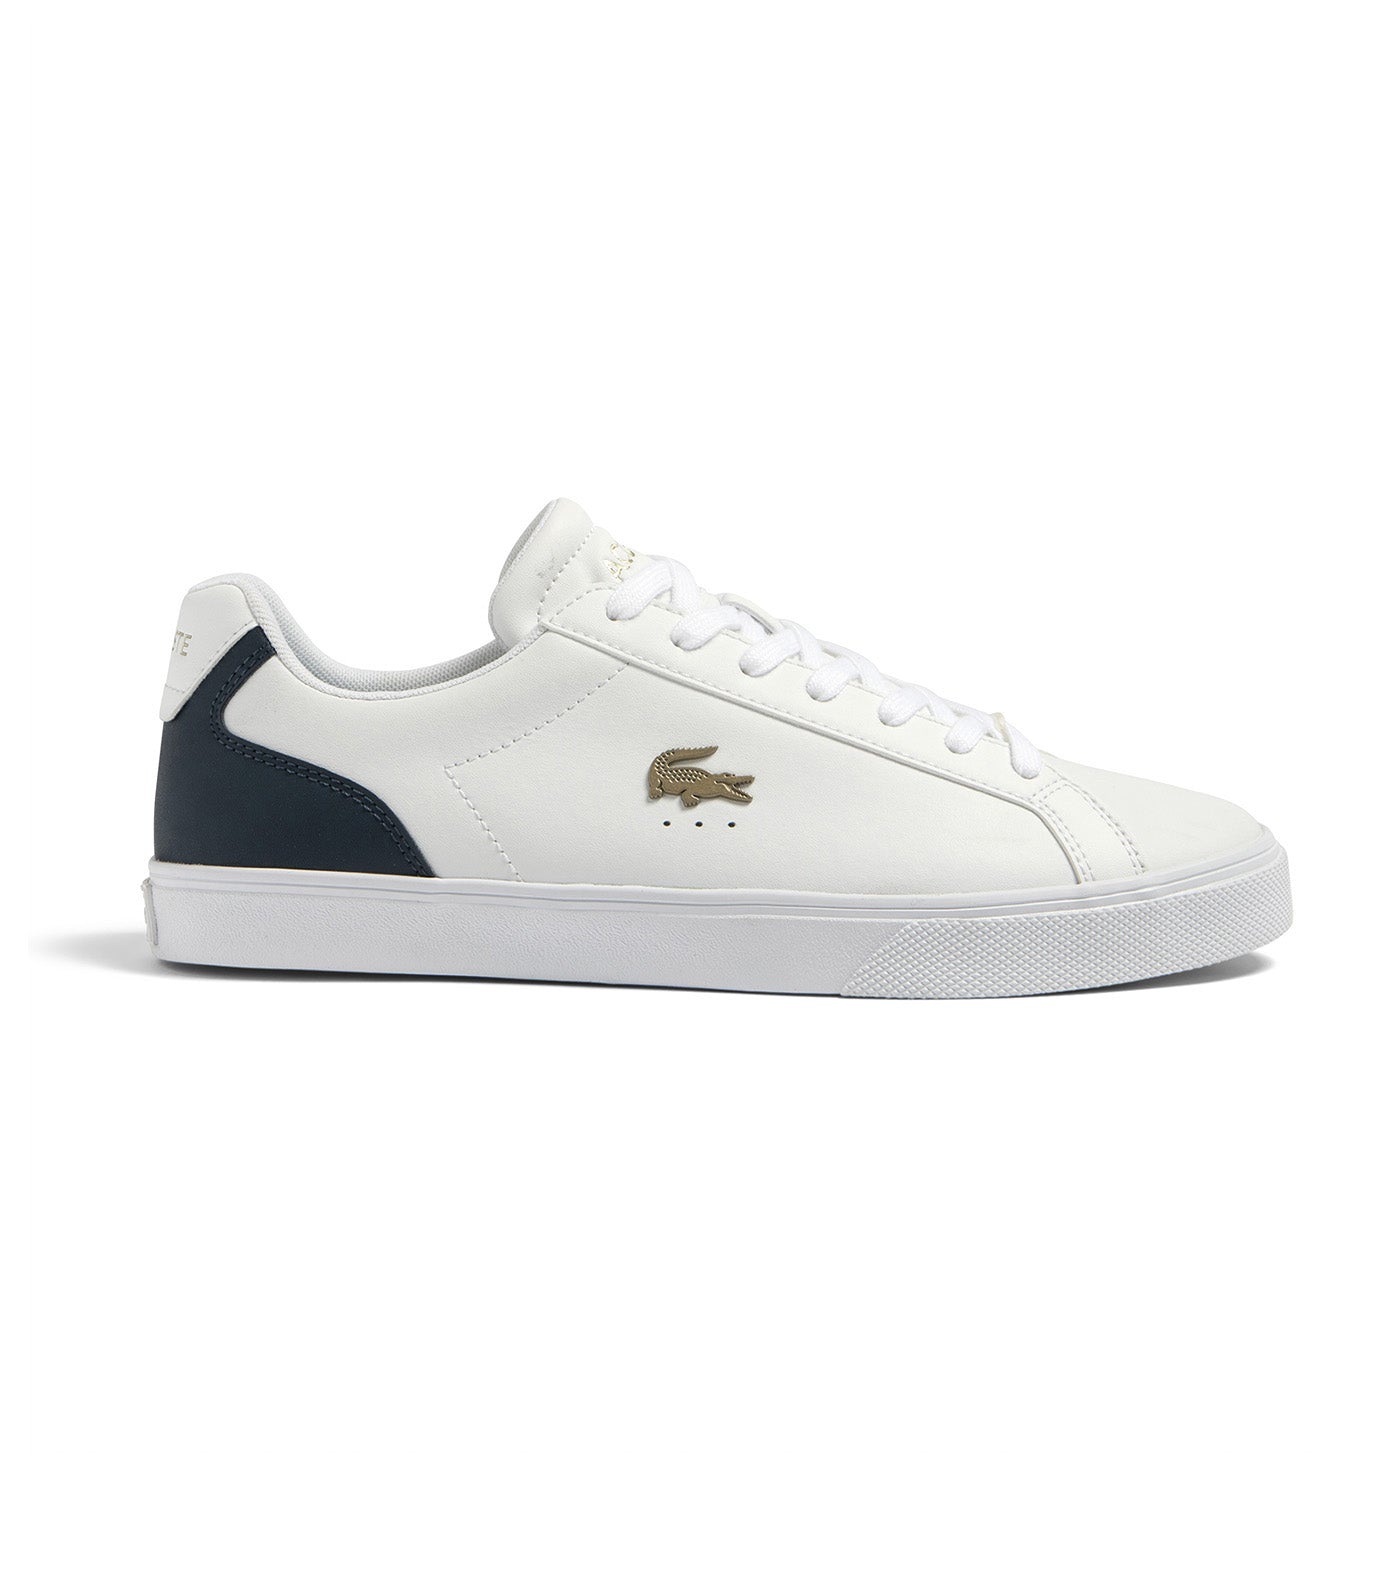 Men's Lacoste Lerond Pro Leather Trainers White/Navy